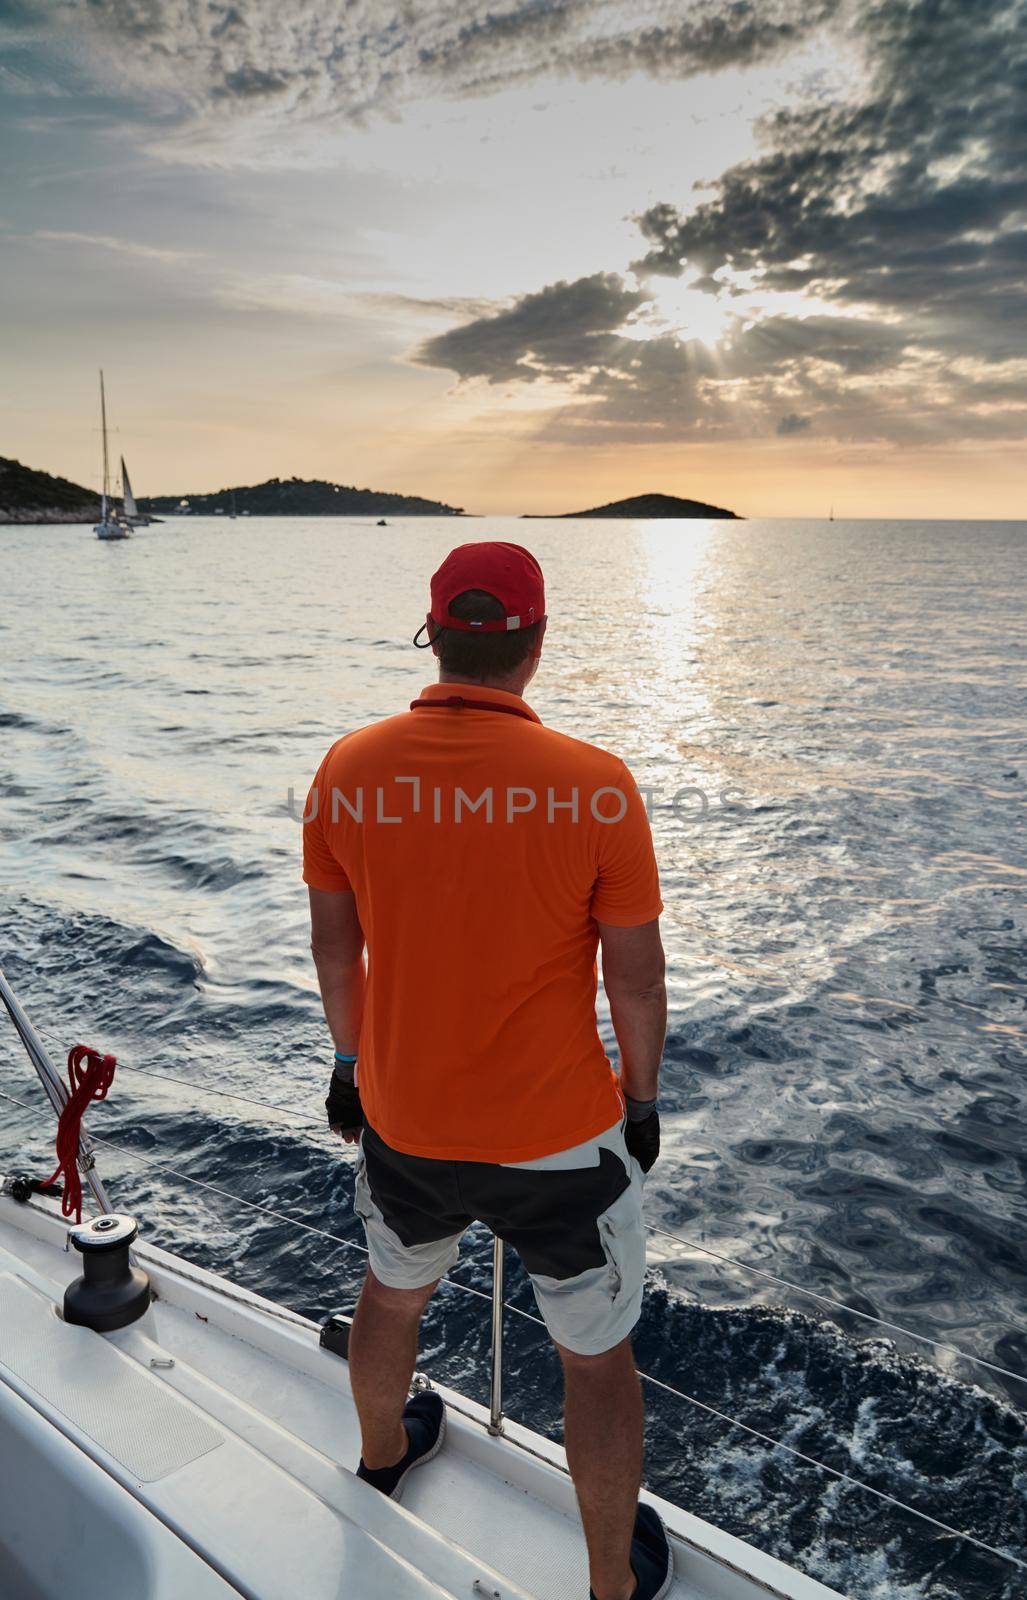 The participant of a sailing regatta is on the edge of the boat, he enjoys a victory and a sunset, he is dressing in t-shirt of orange color, sailboat and island is on background